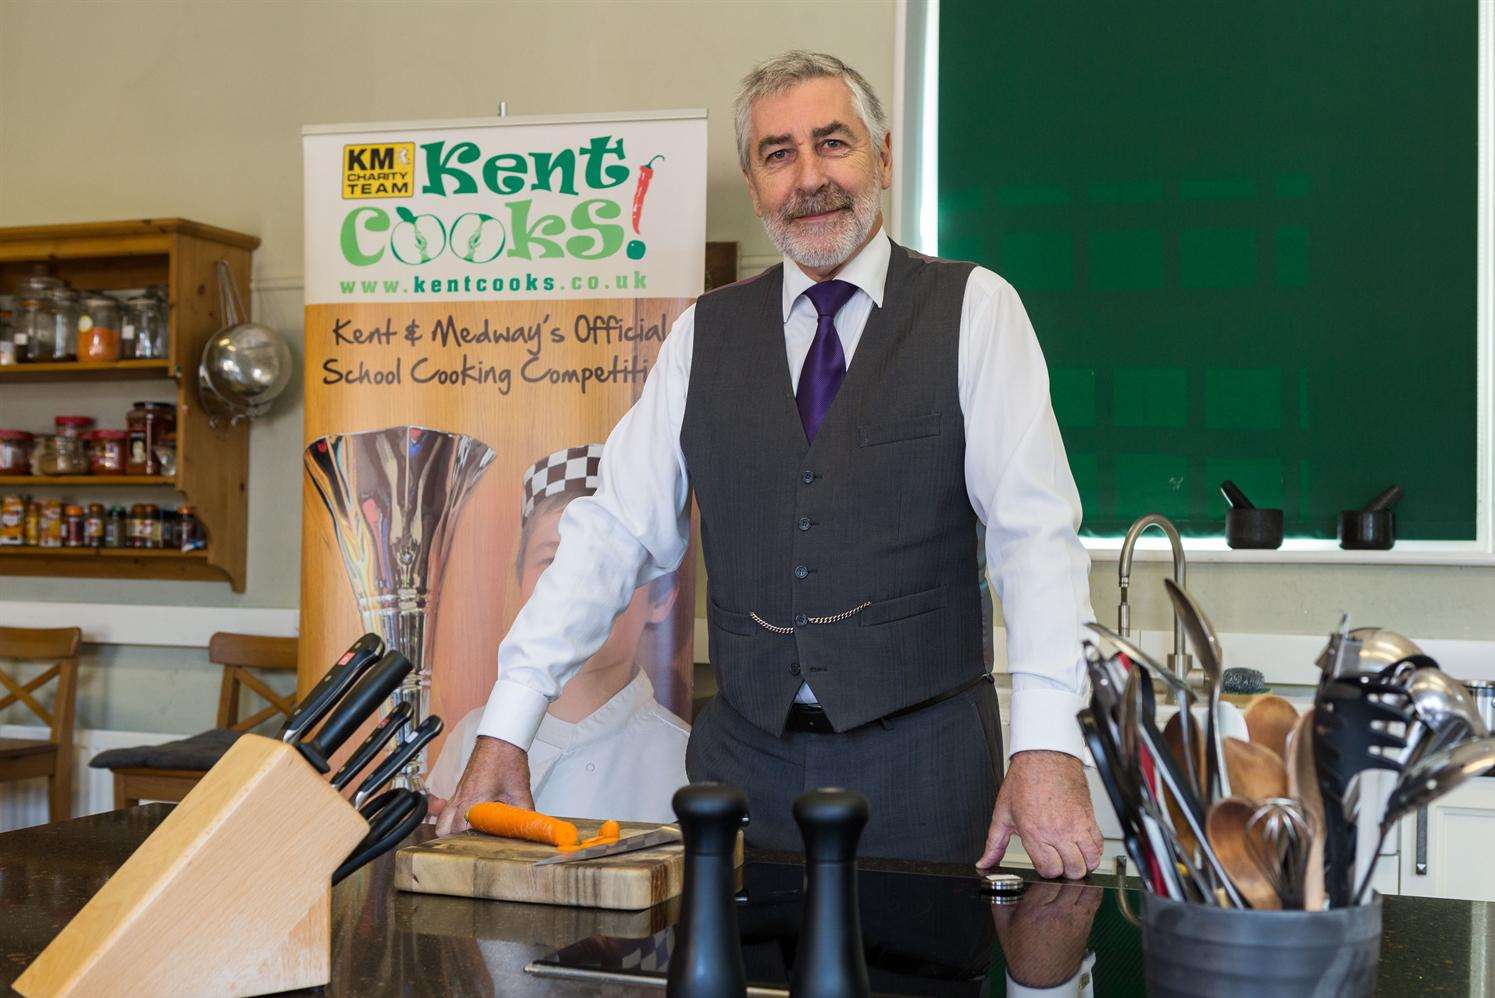 Jim Ratchford of Licensing Consultancy Services, partners for the official school cookery competition KM Kent Cooks